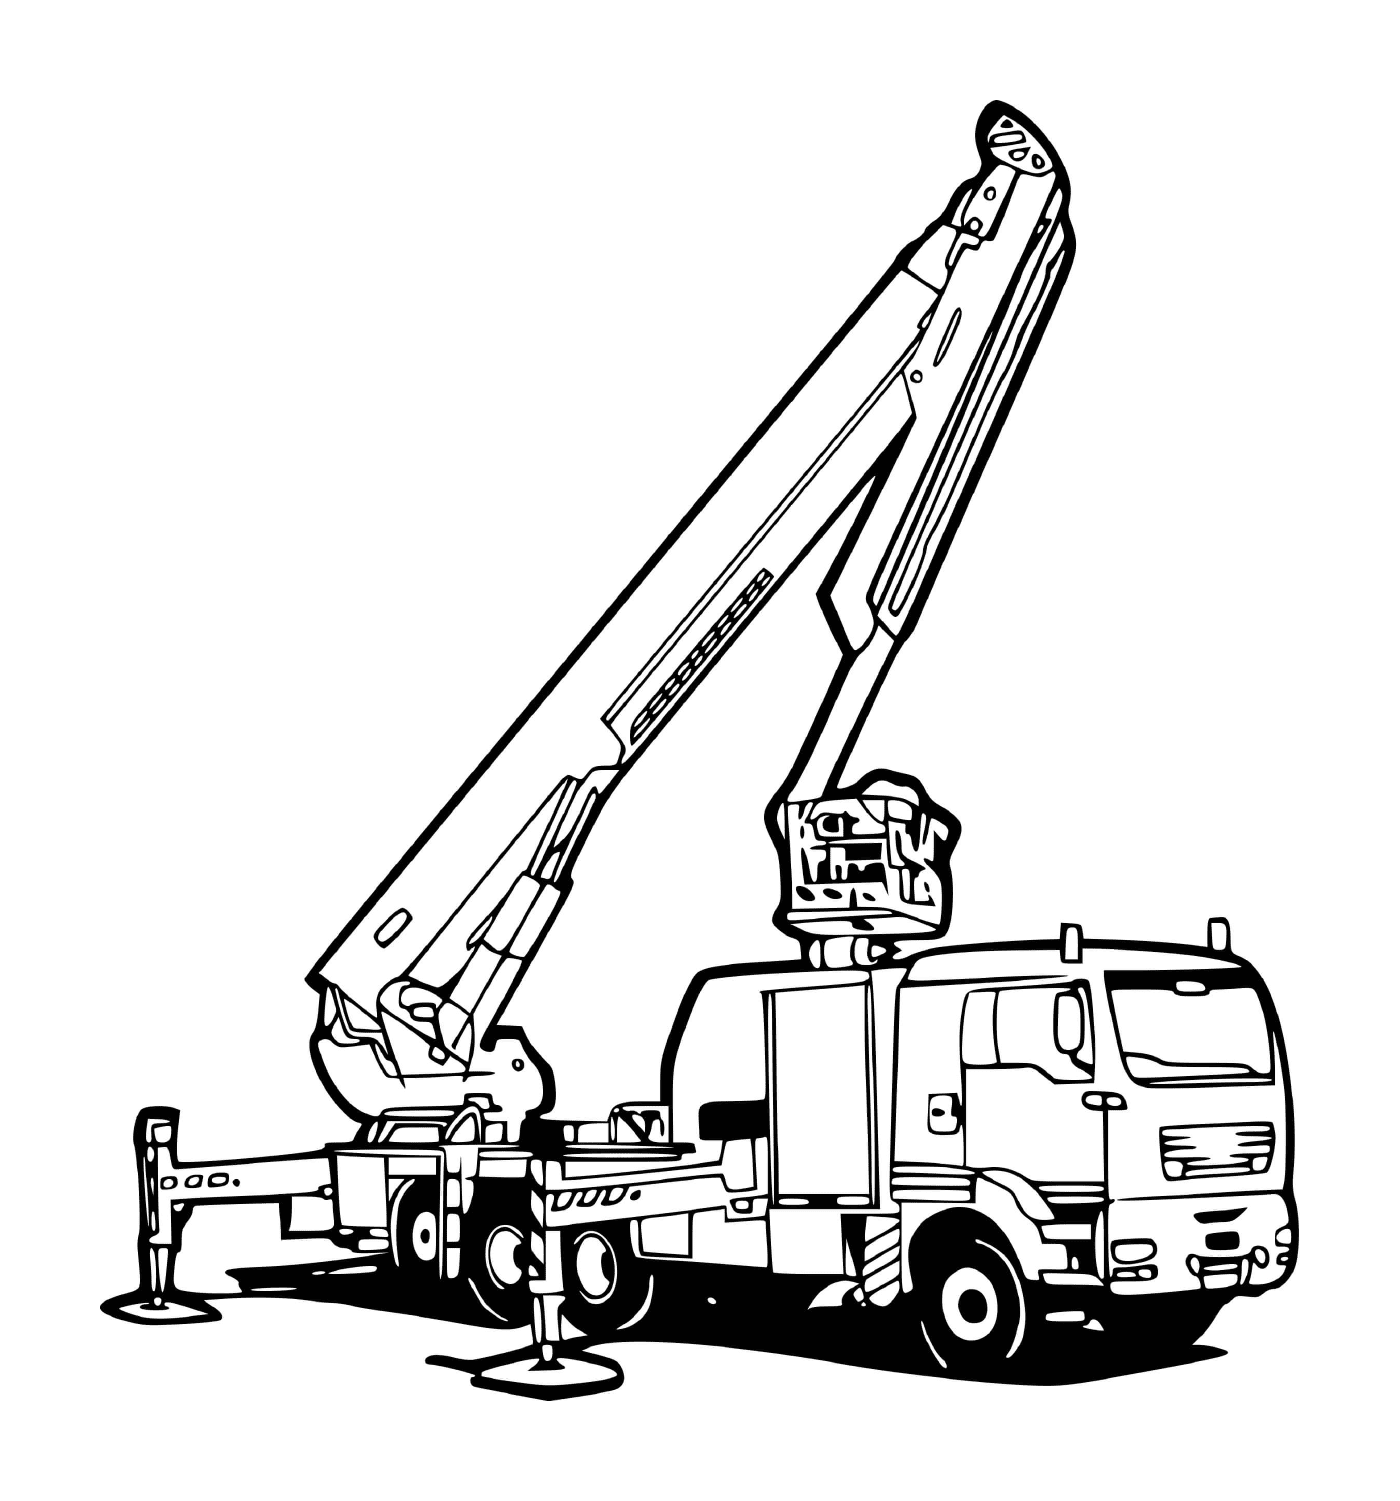  Truck crane for firefighters 